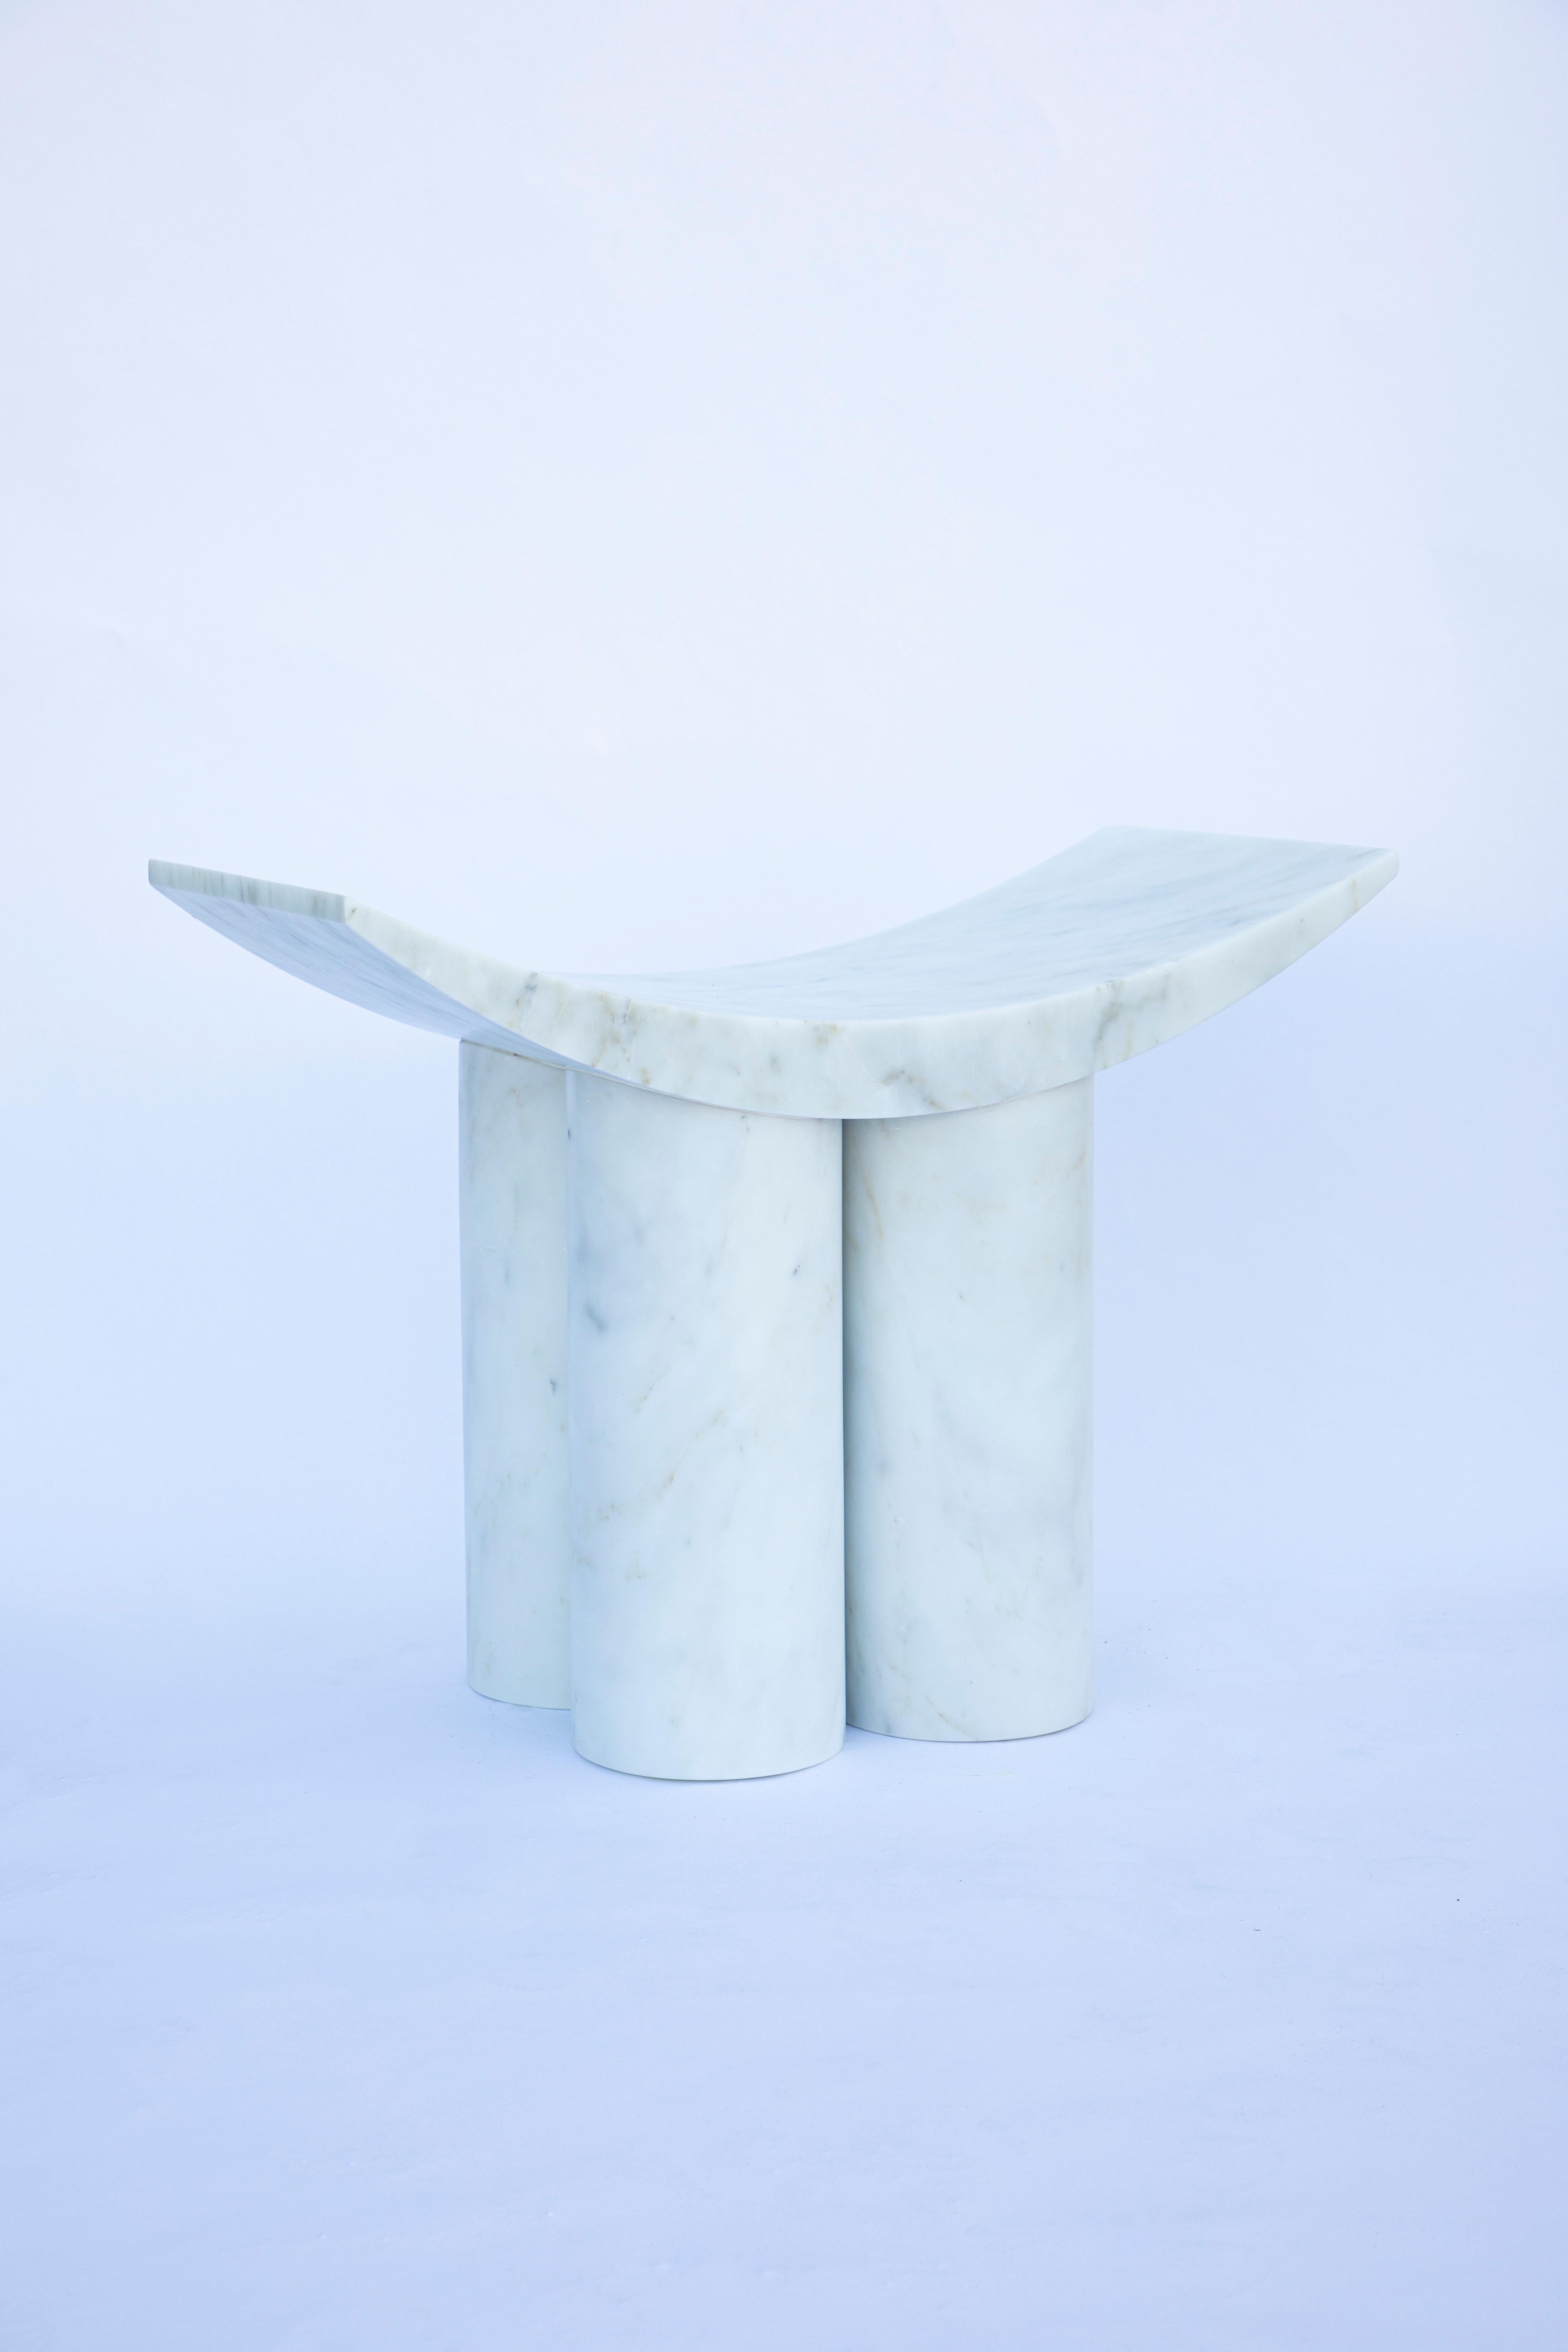 White marble gamma stool by Pietro Franceschini
Materials: Calacatta Delicata Marble
Dimensions: W 70cm, L 35cm, H 45cm
Available in other marbles.

Pietro Franceschini
Architect // Designer
Pietro Franceschini is an architect and designer based in